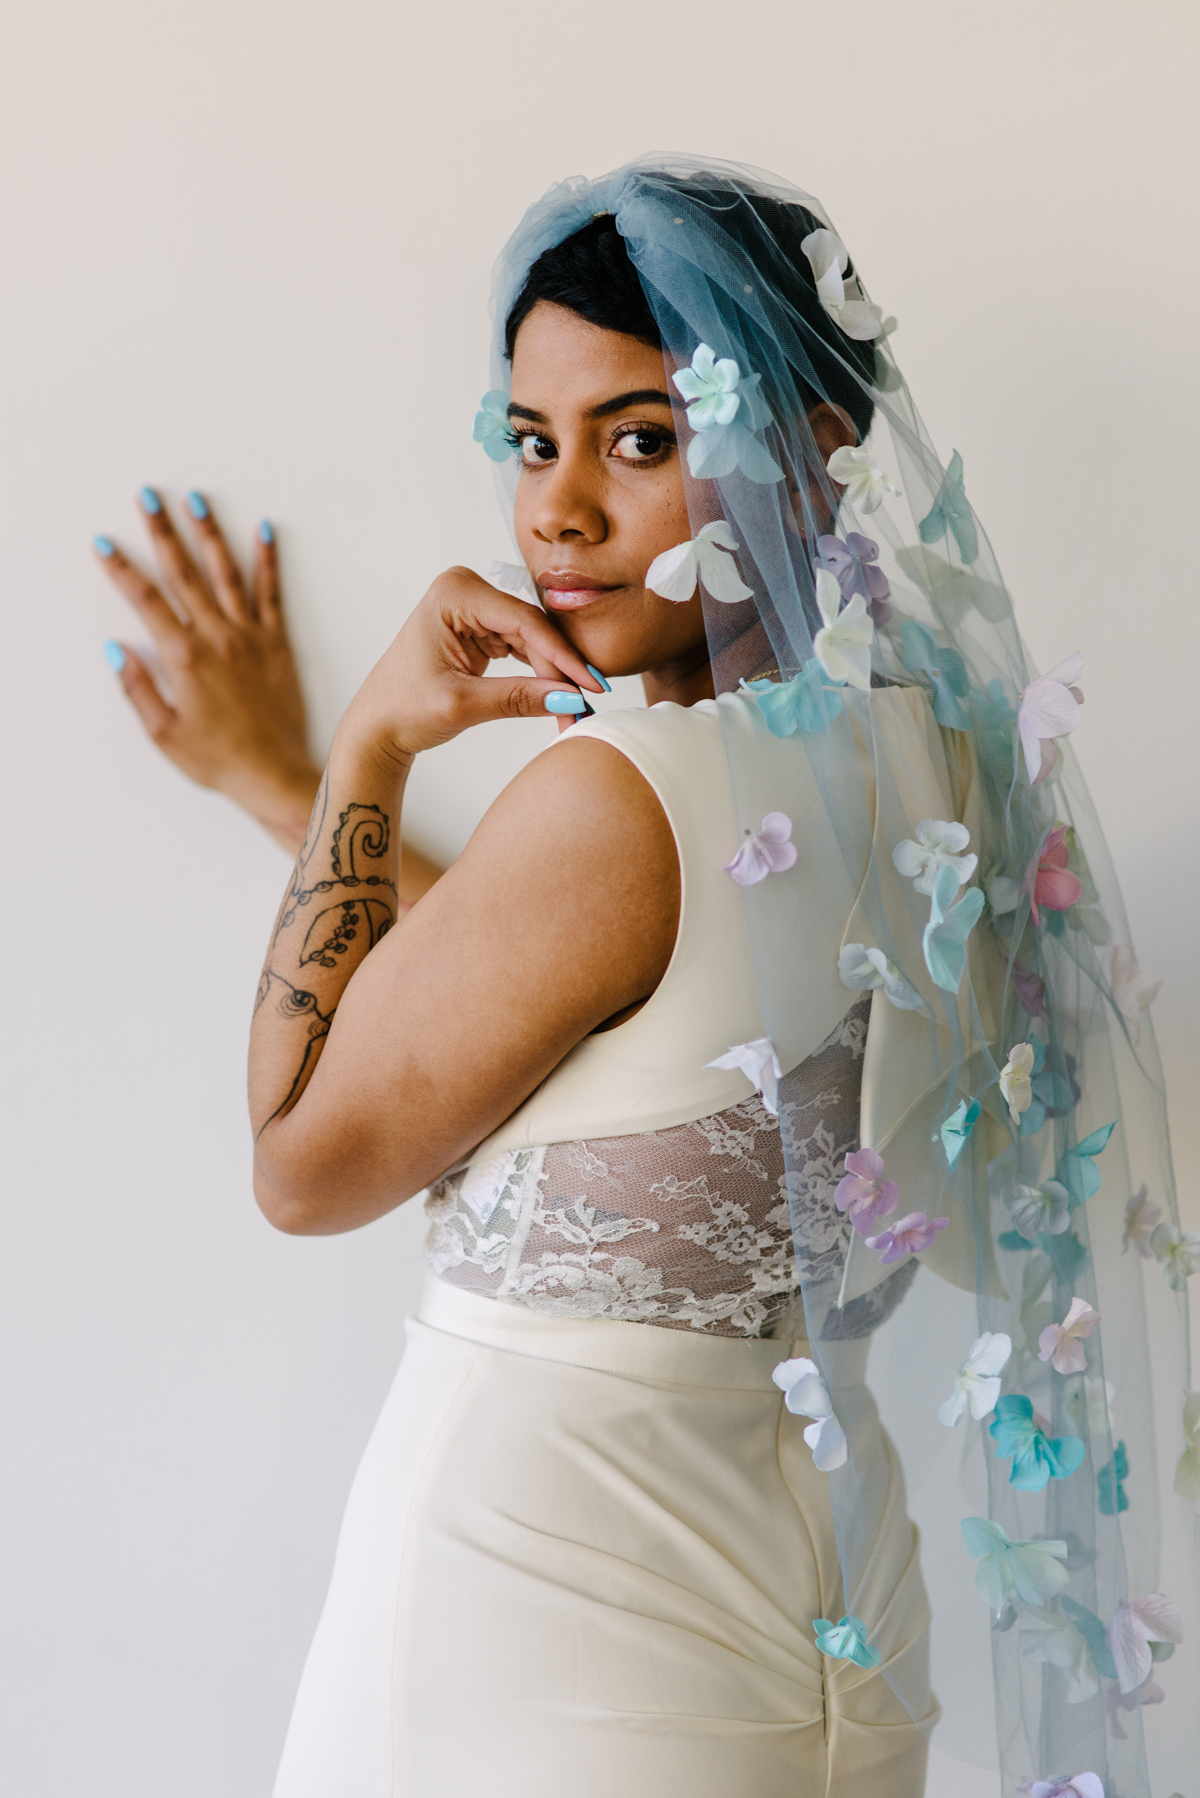 A woman looks over her shoulder back at the camera while wearing a light blue wedding veil